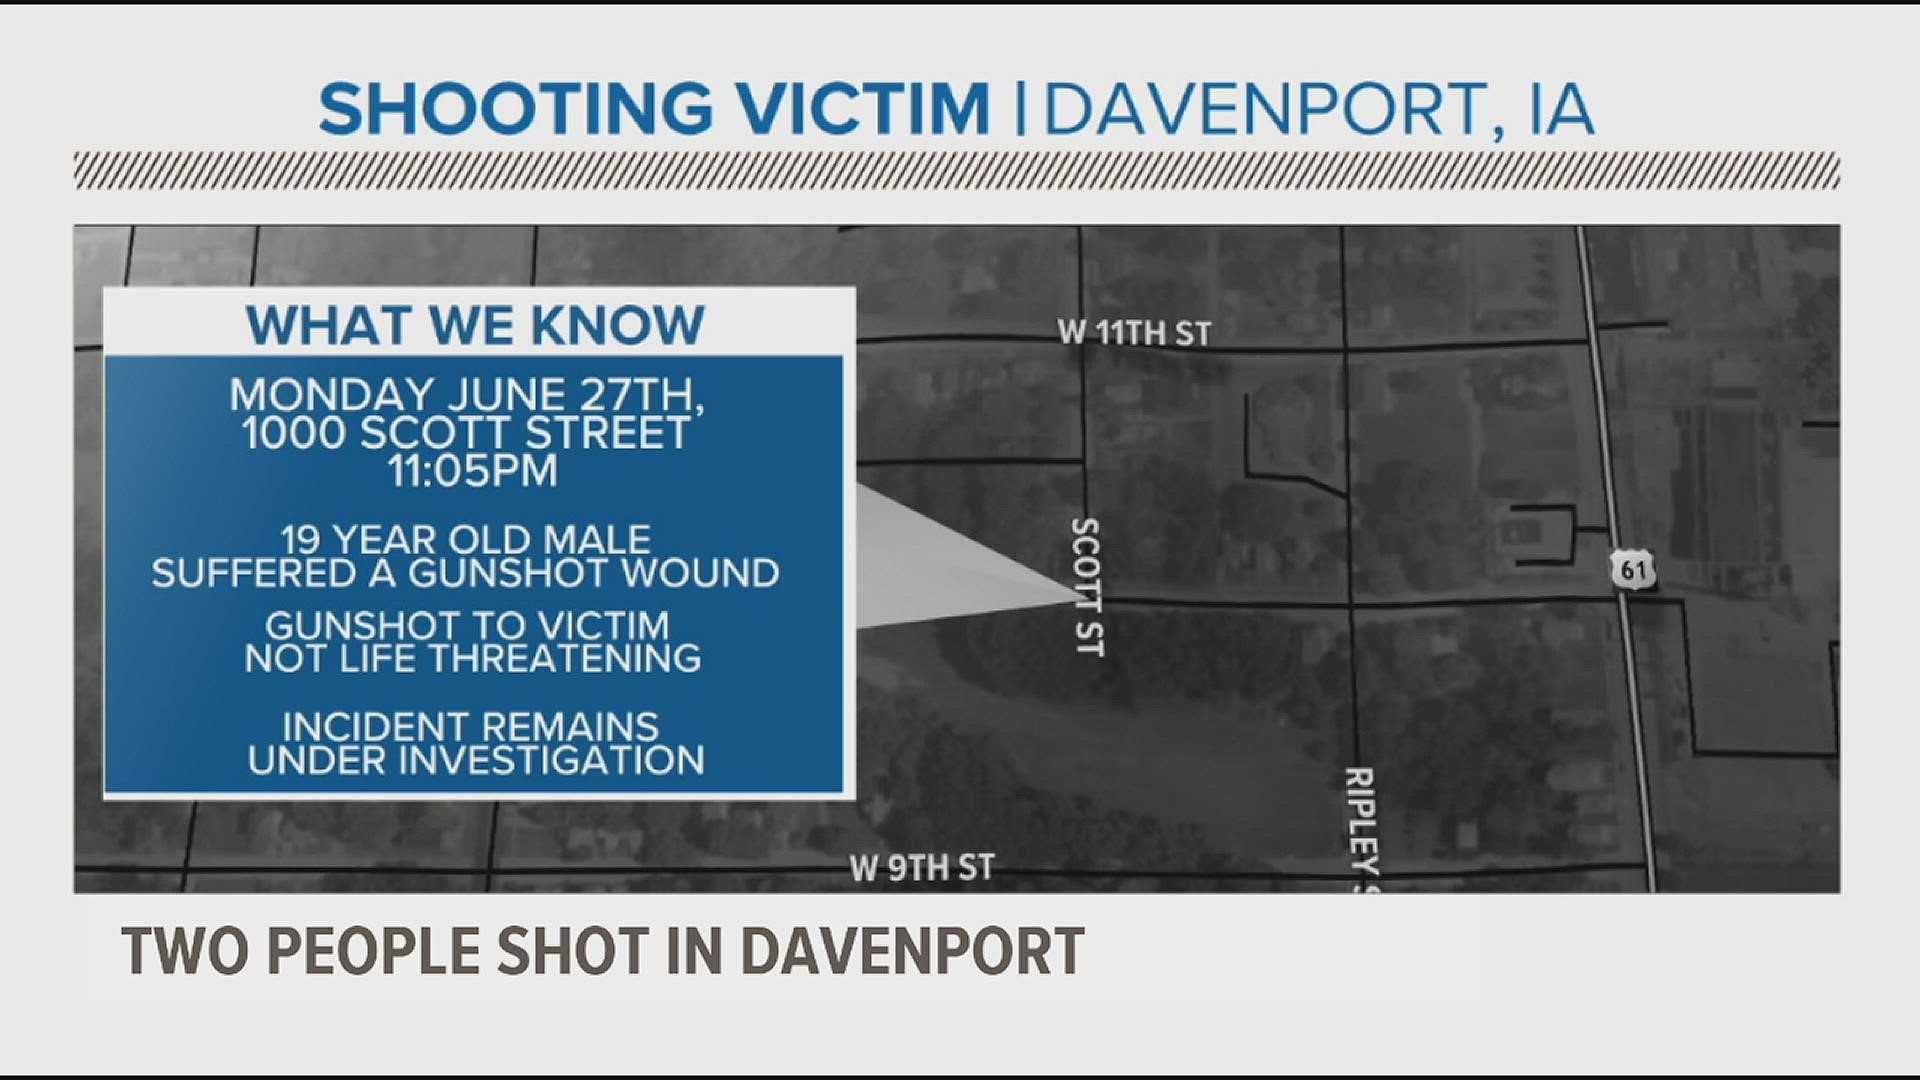 A 19- and 16-year-old are seriously injured following shootings Monday night in Davenport. Police say the incidents are not currently linked.